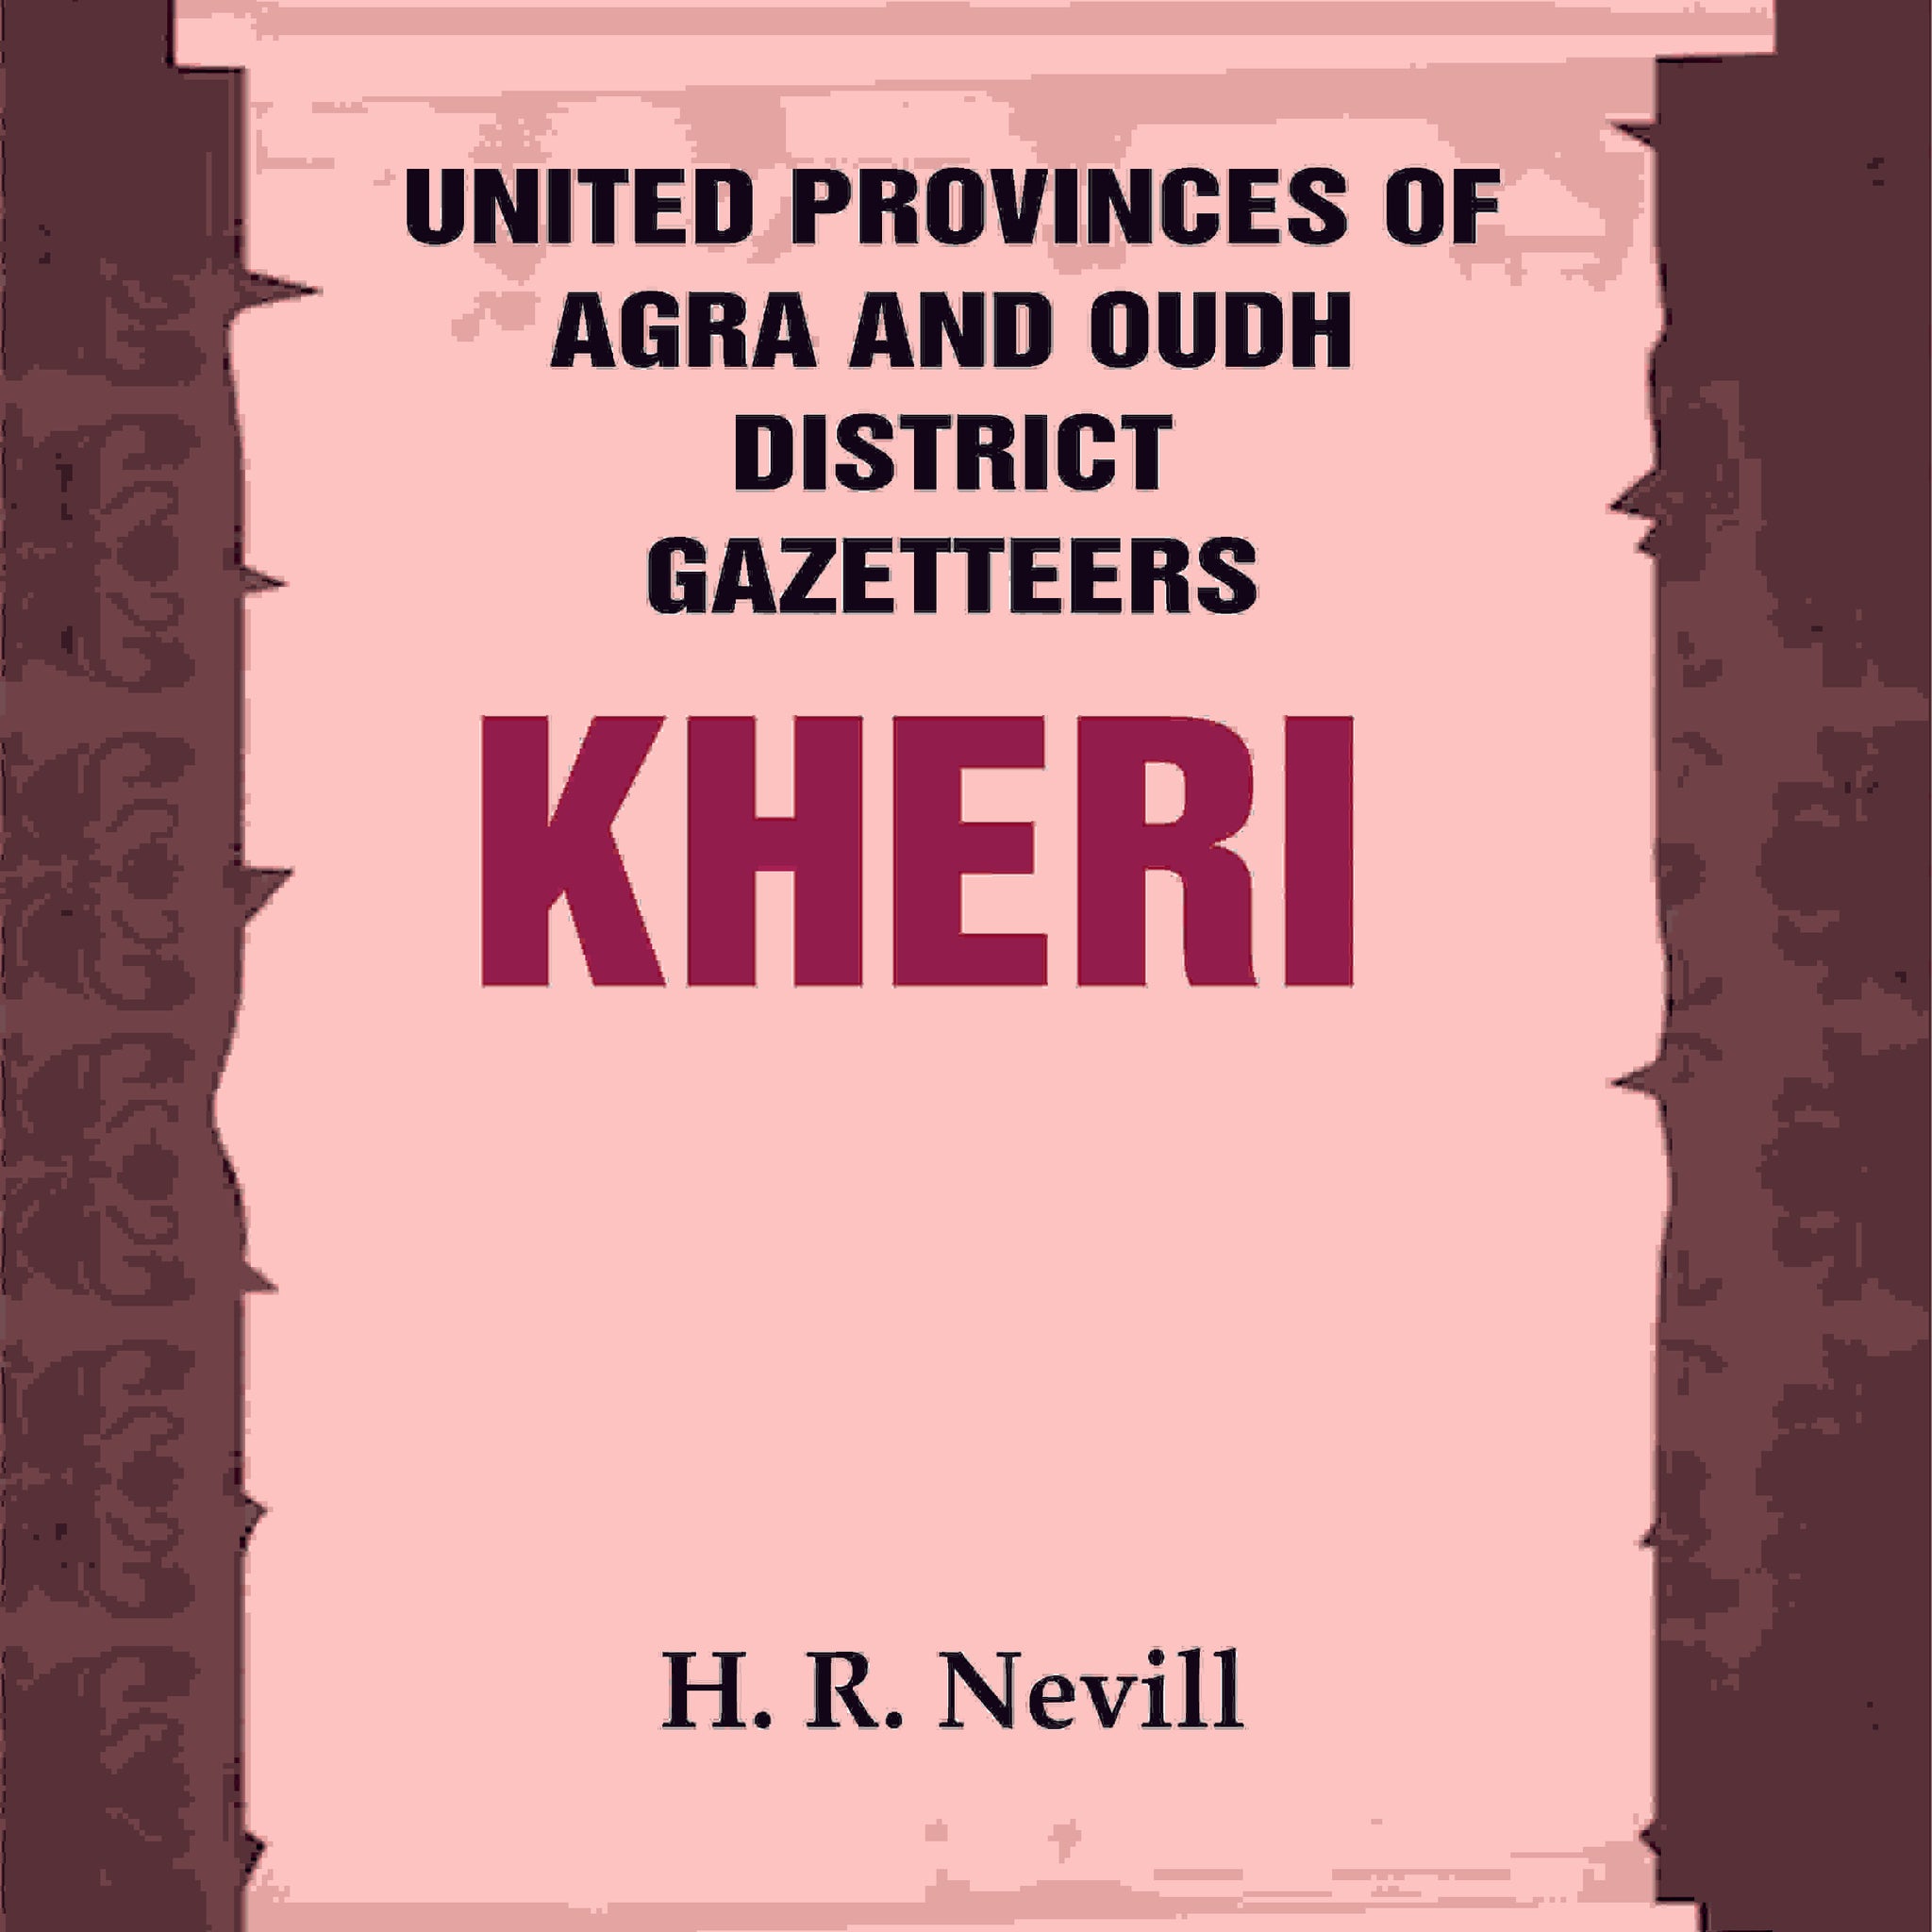 United Provinces of Agra and Oudh District Gazetteers: Kheri